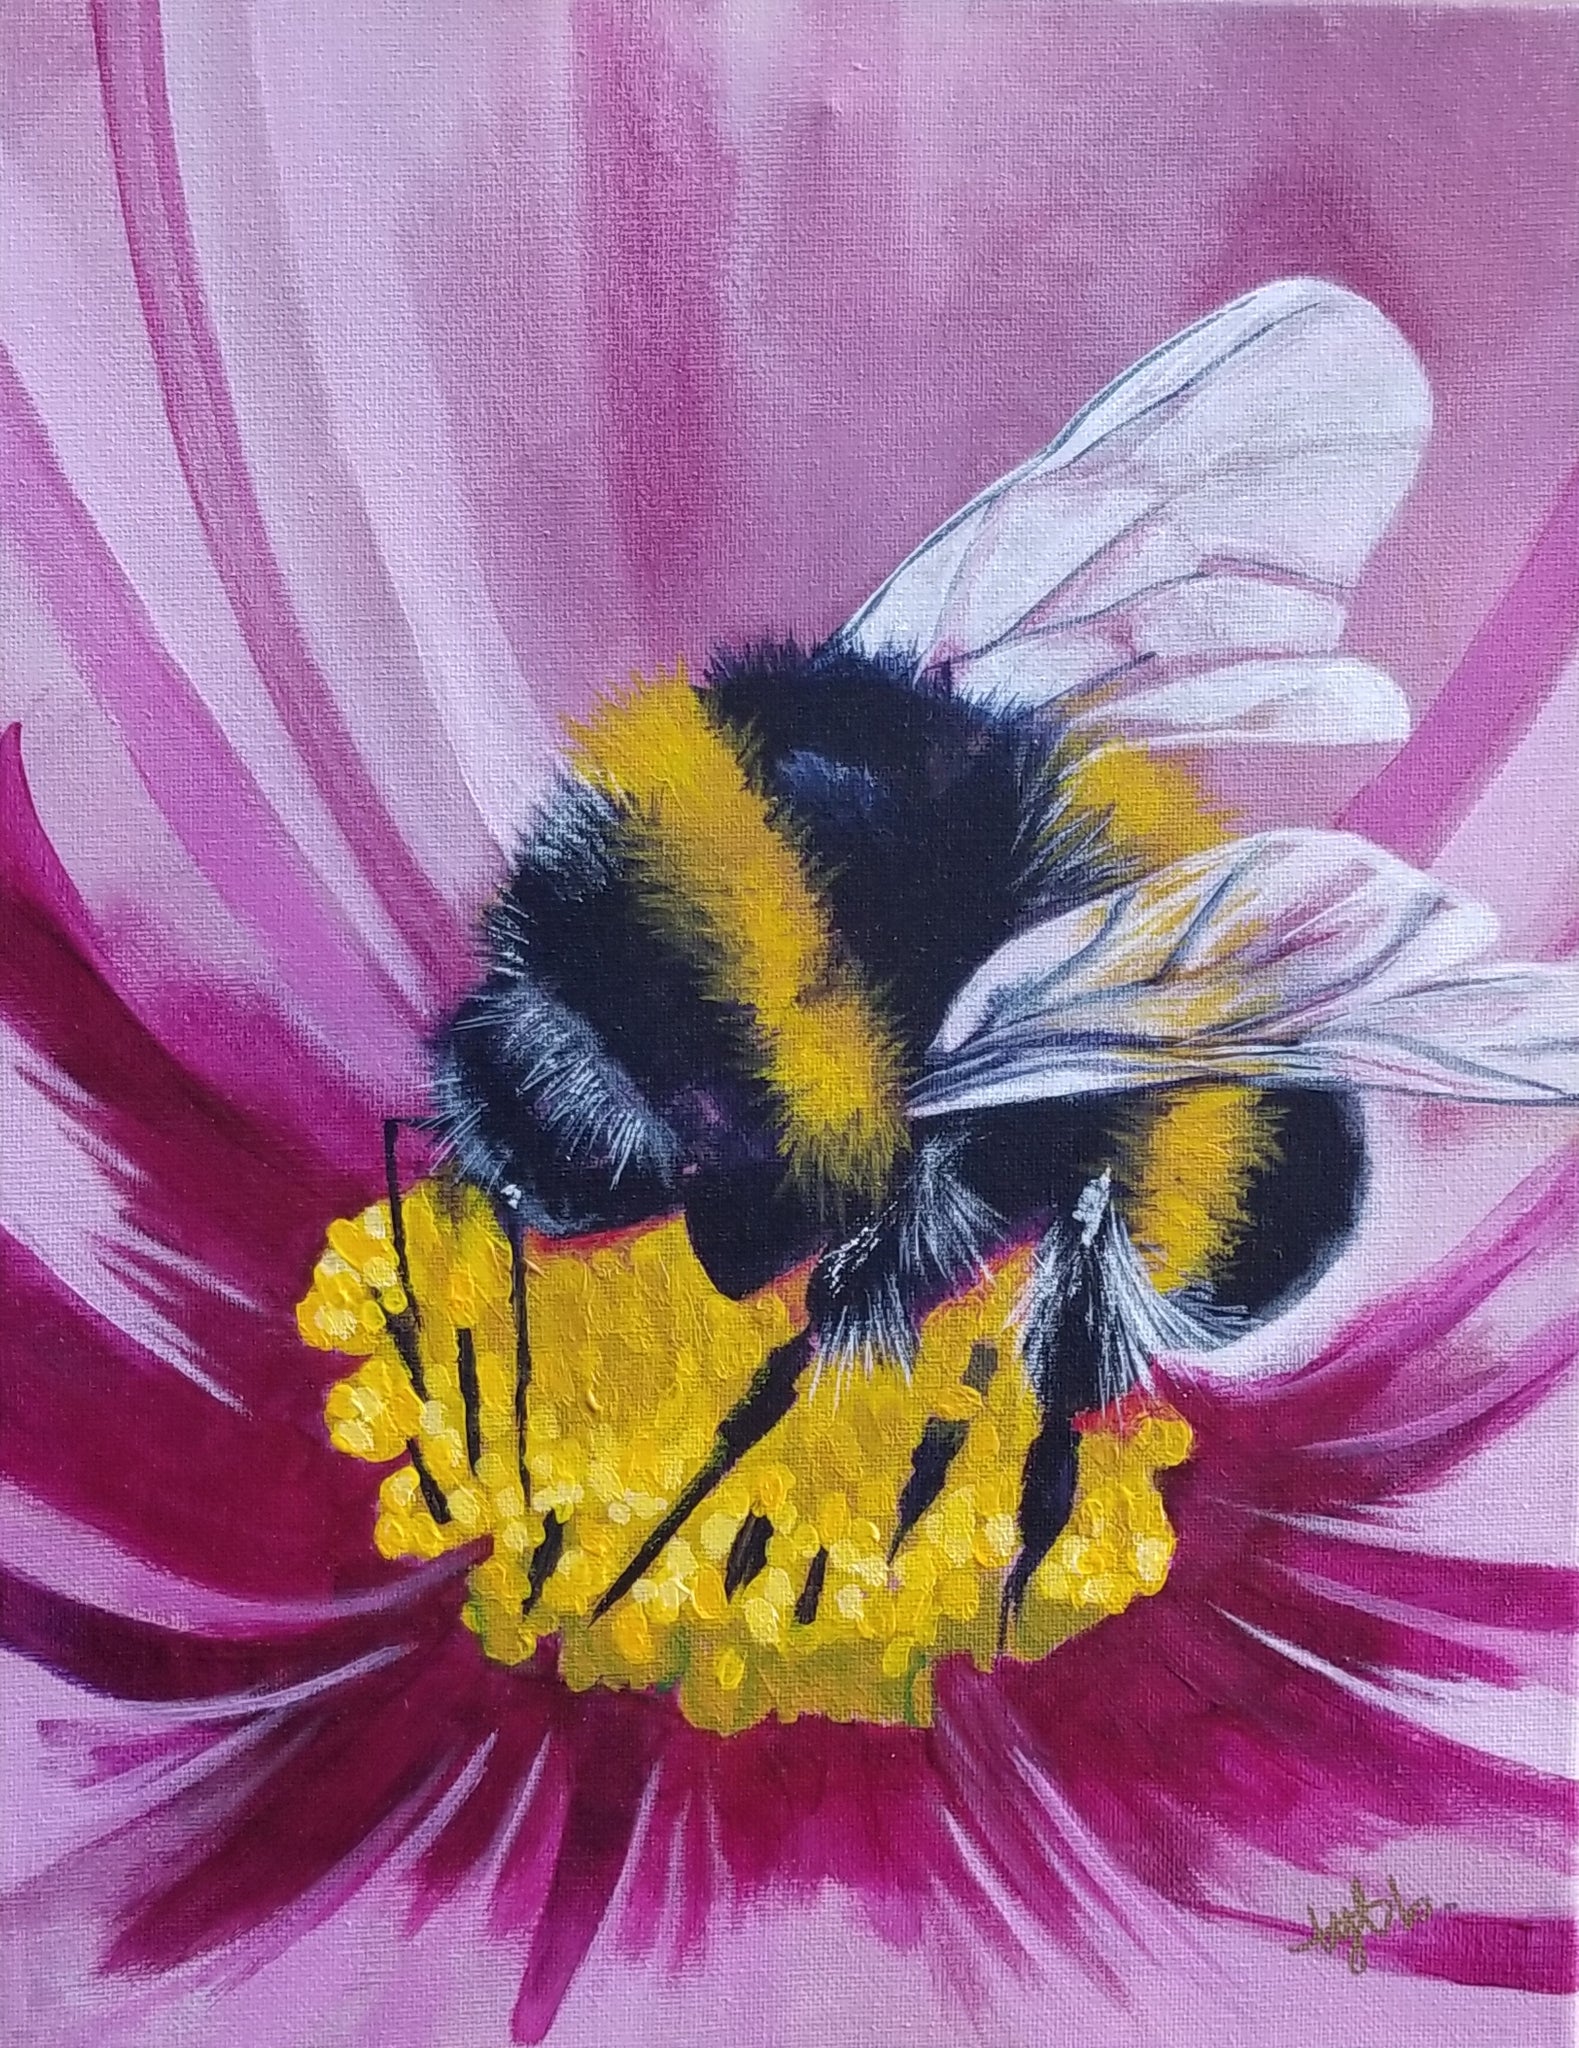 "Bumblebee I" by Tyla Bowers